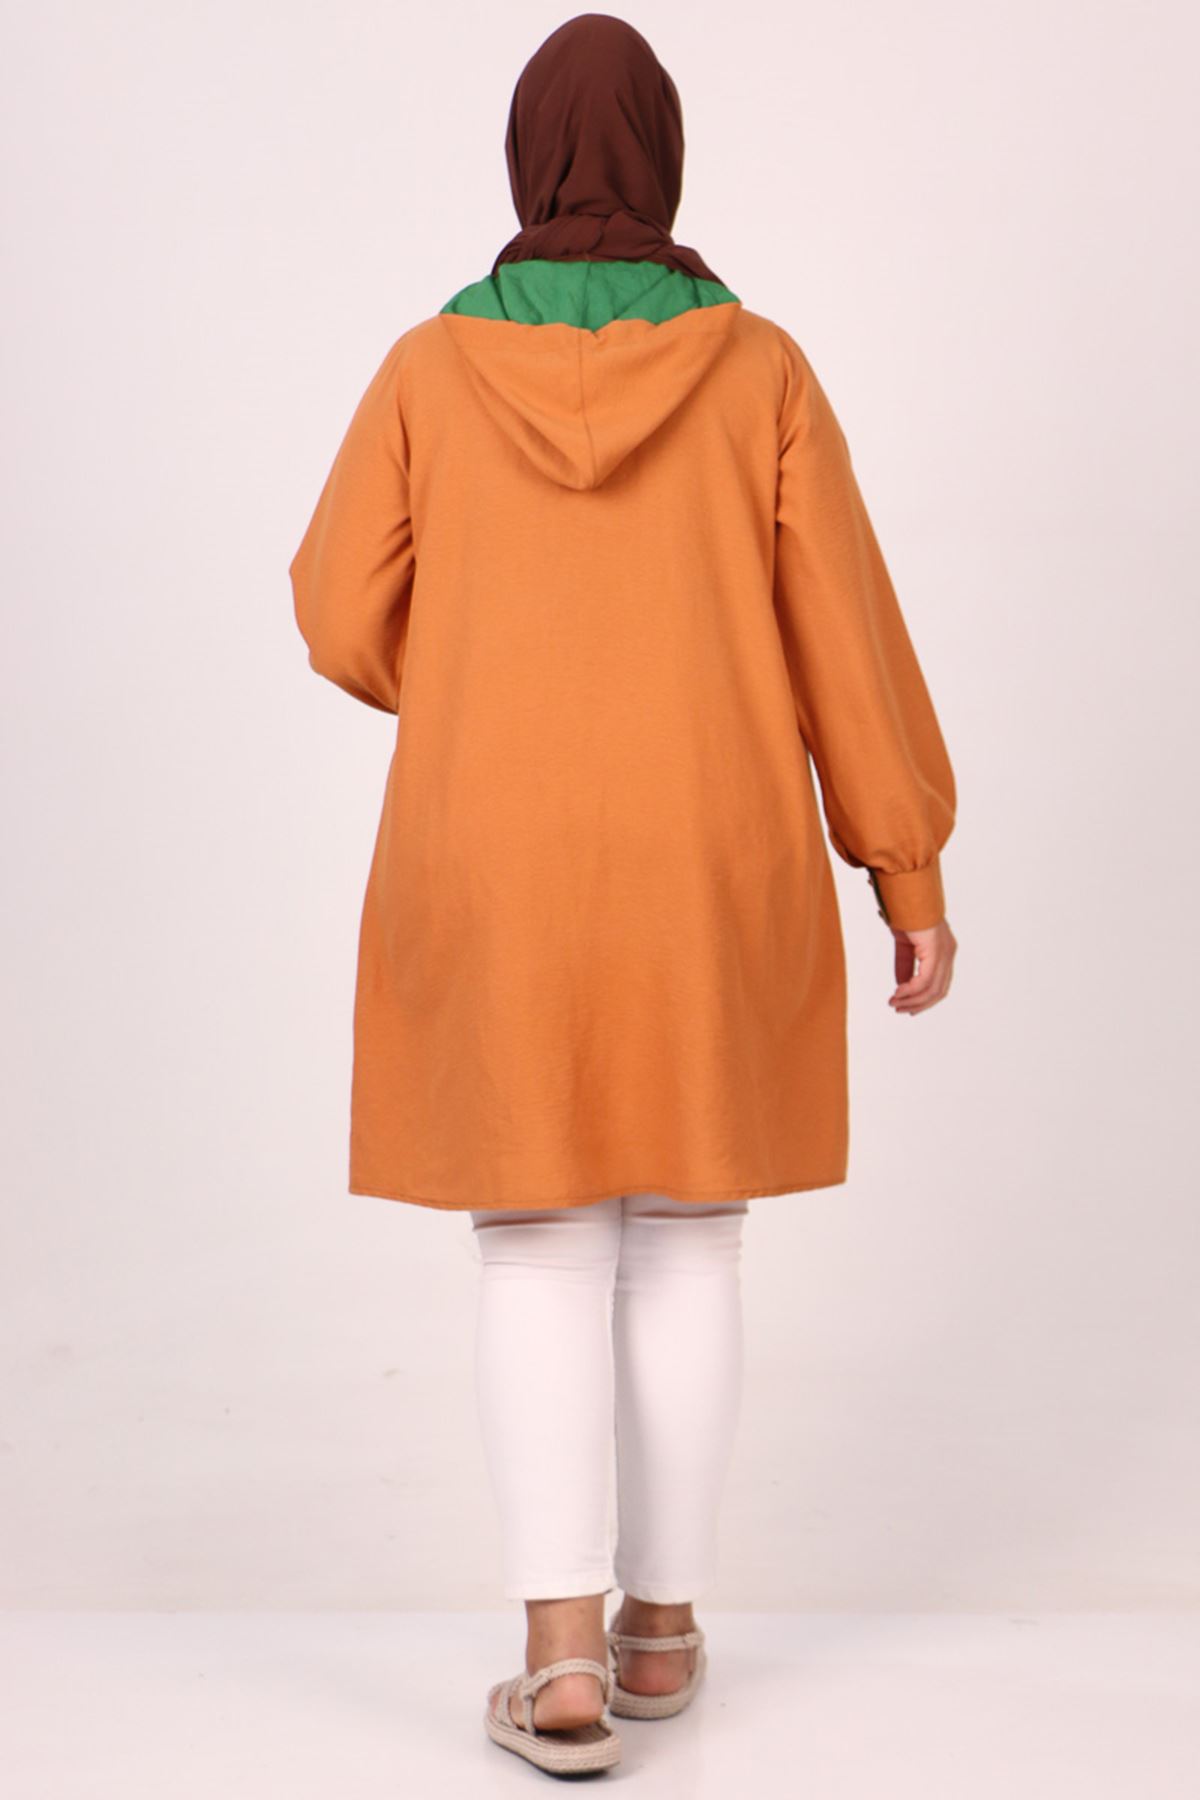 38109 Large Size Hooded Miracle Tunic - Mustard